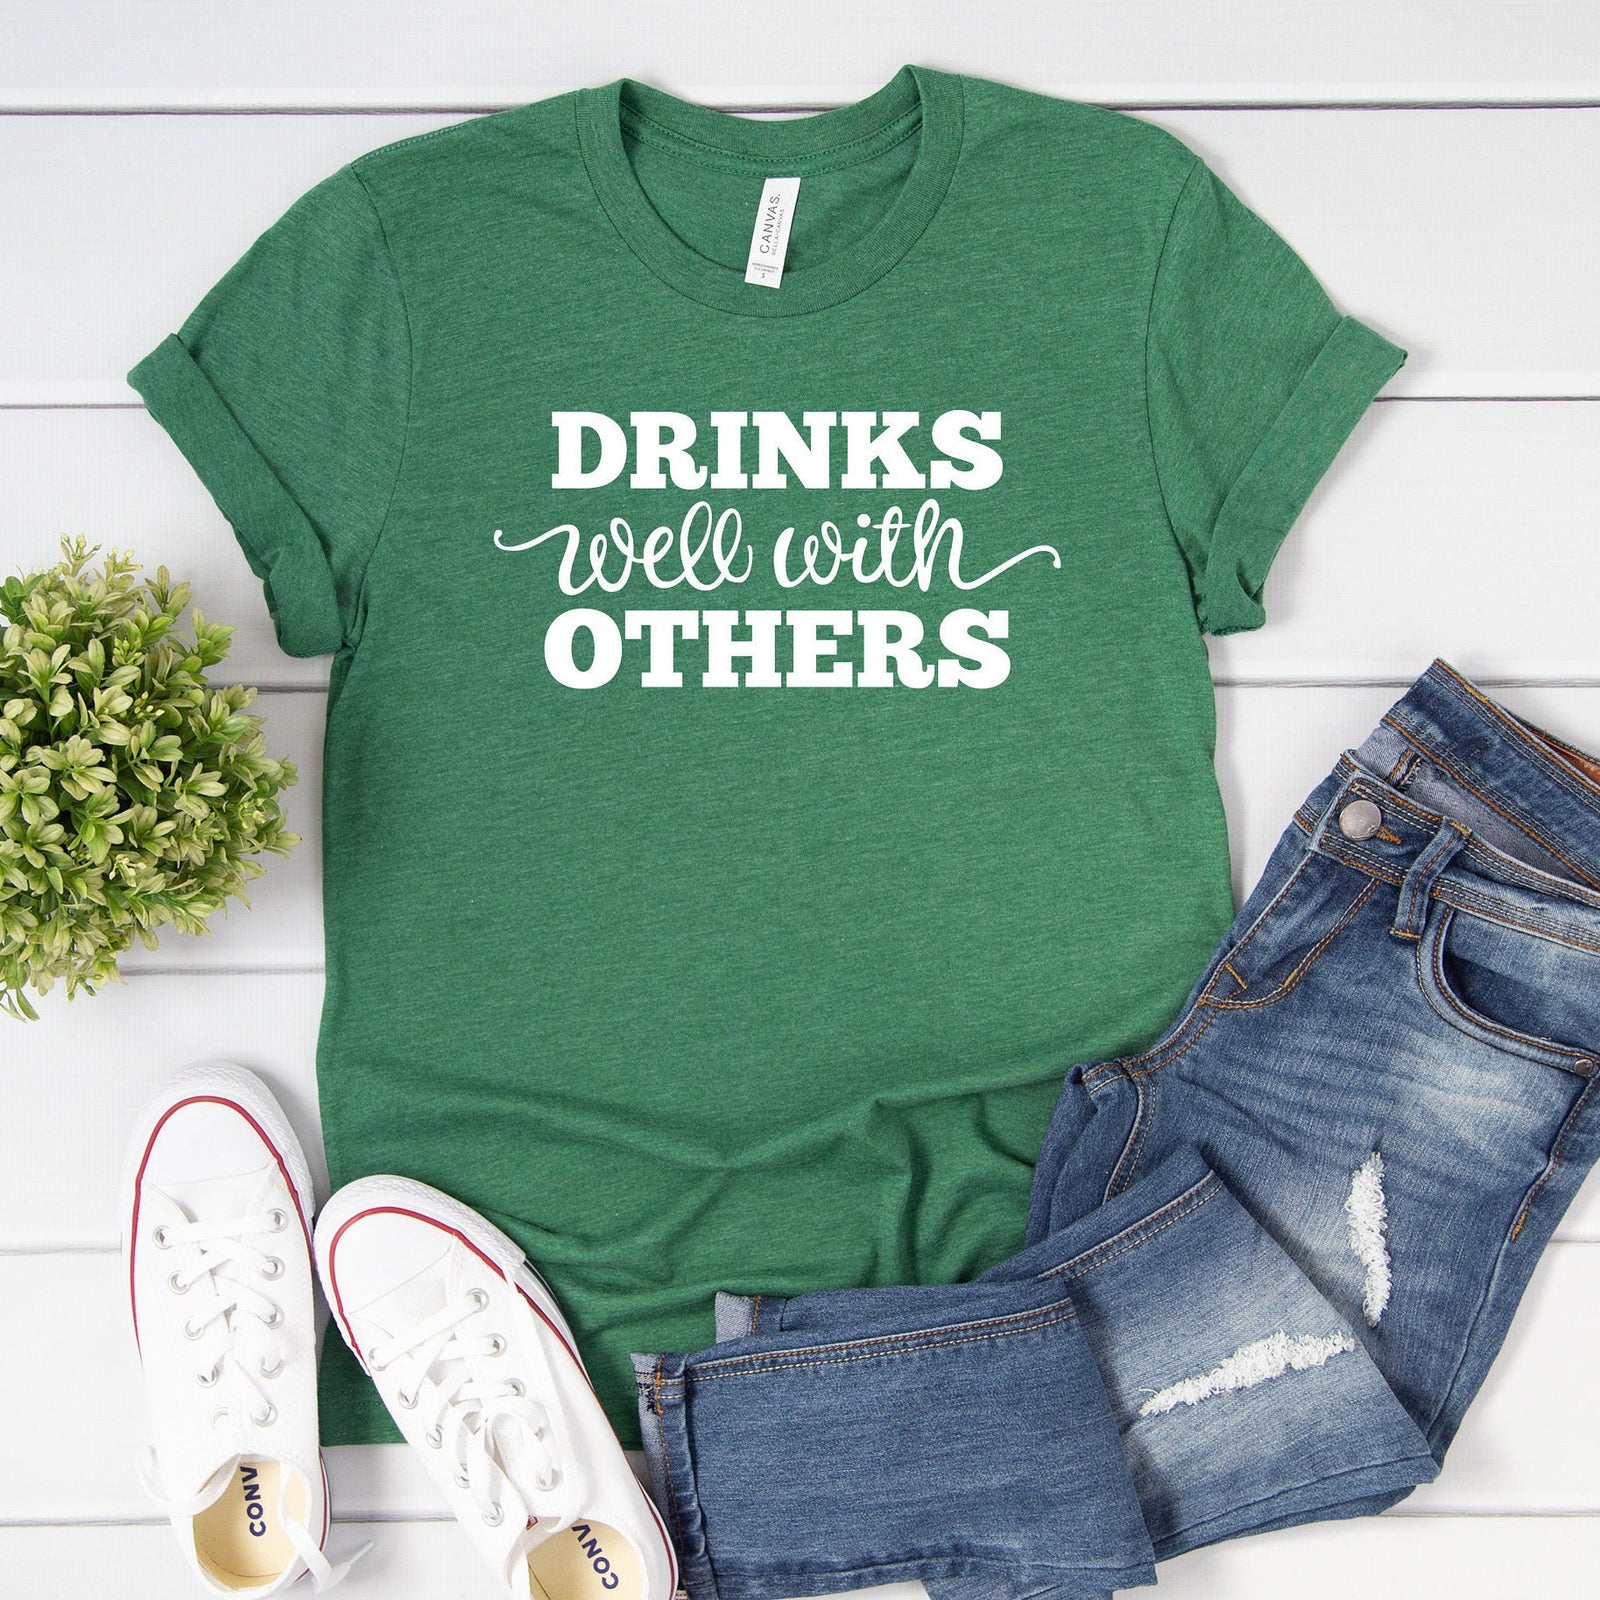 Drinks Well With Others T Shirt - Funny Drinking Shirt - St. Patrick's Day - Funny Saint Patty's Day Humor Shirt -  Drink Lover Shirt